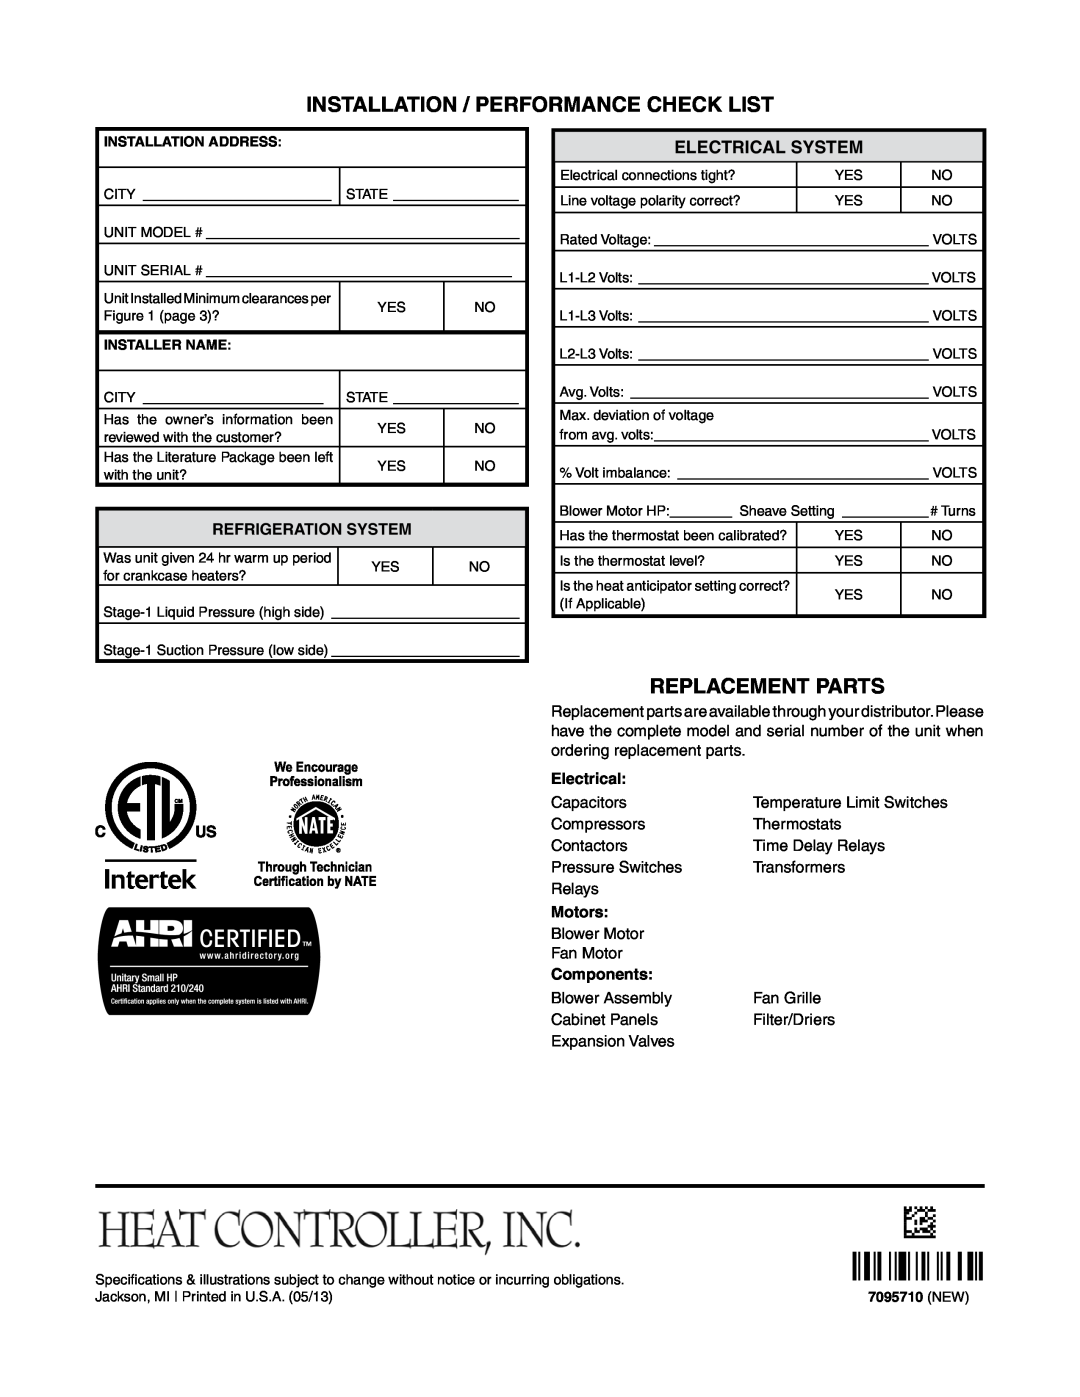 Heat Controller R-410A Installation / Performance Check List, Replacement Parts, Electrical System 